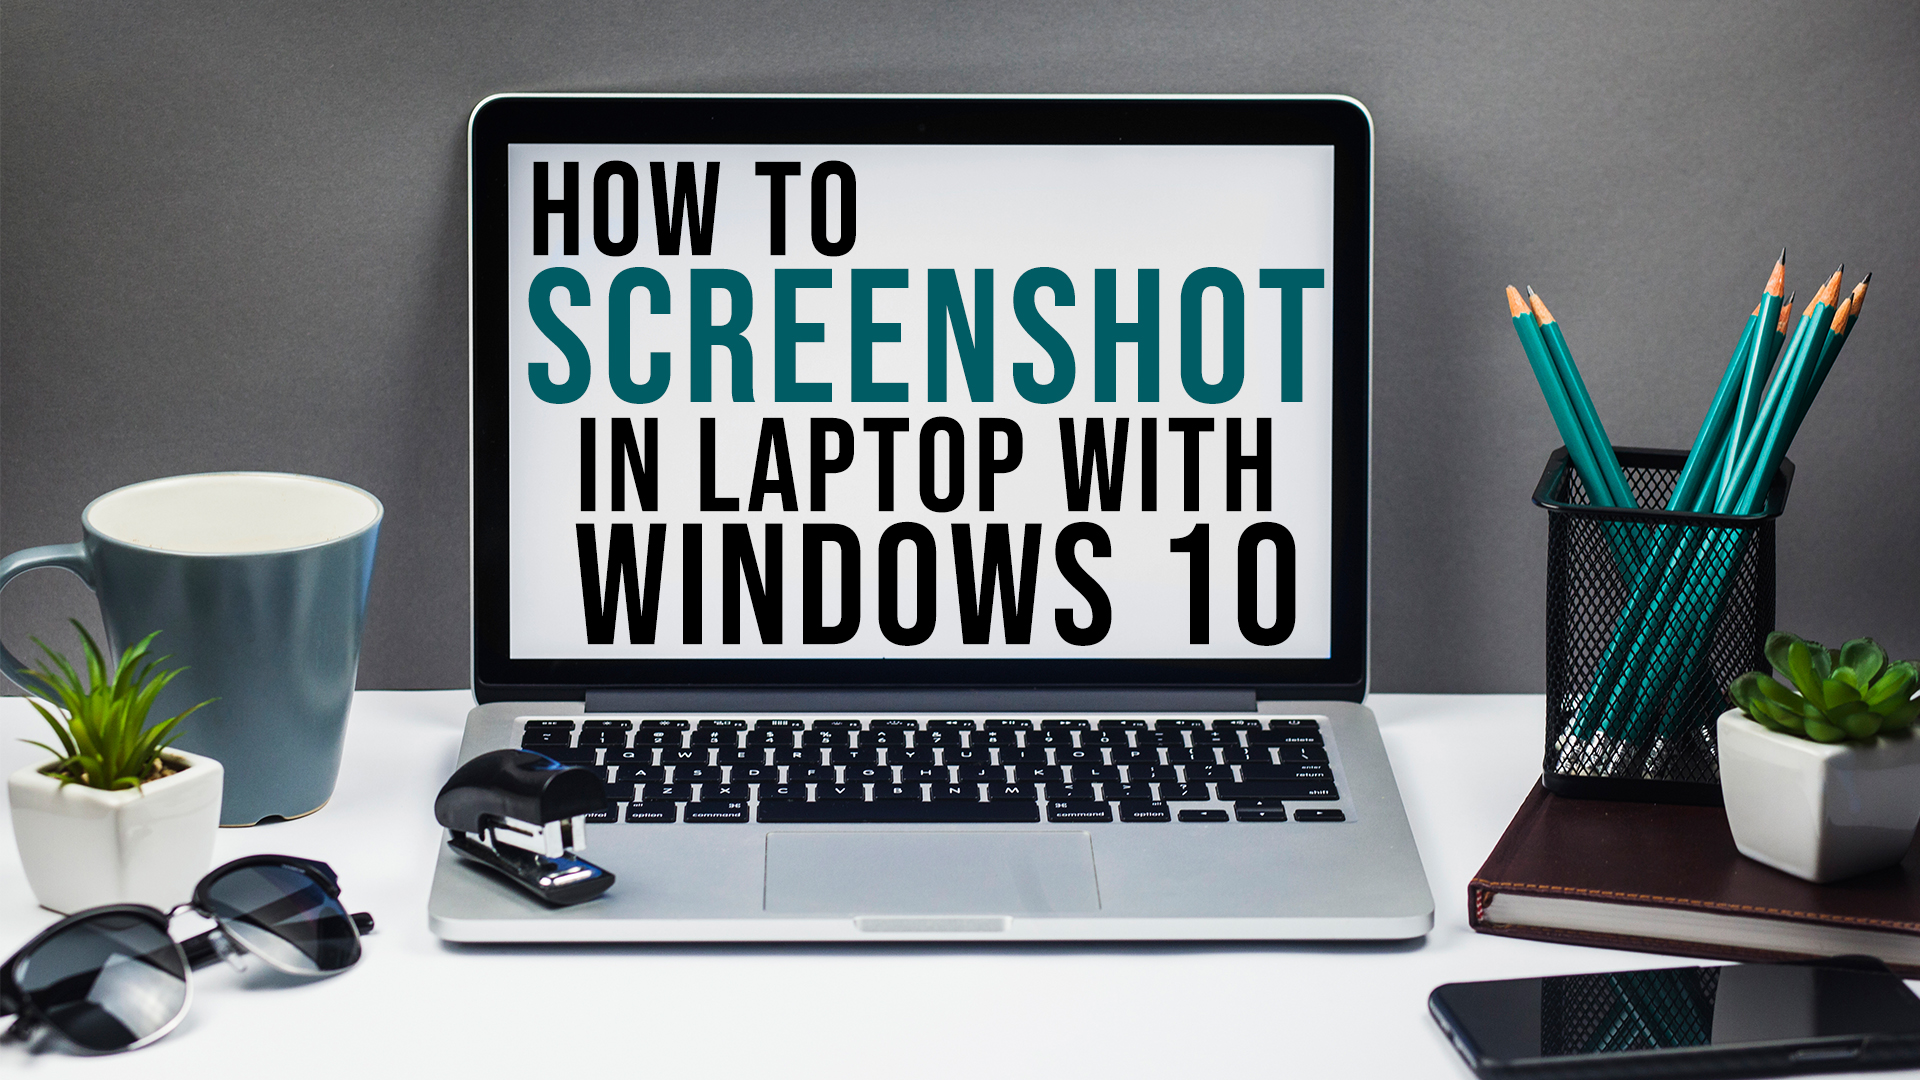 How to Screenshot in Laptop with Windows 10? Here are 5 Ways